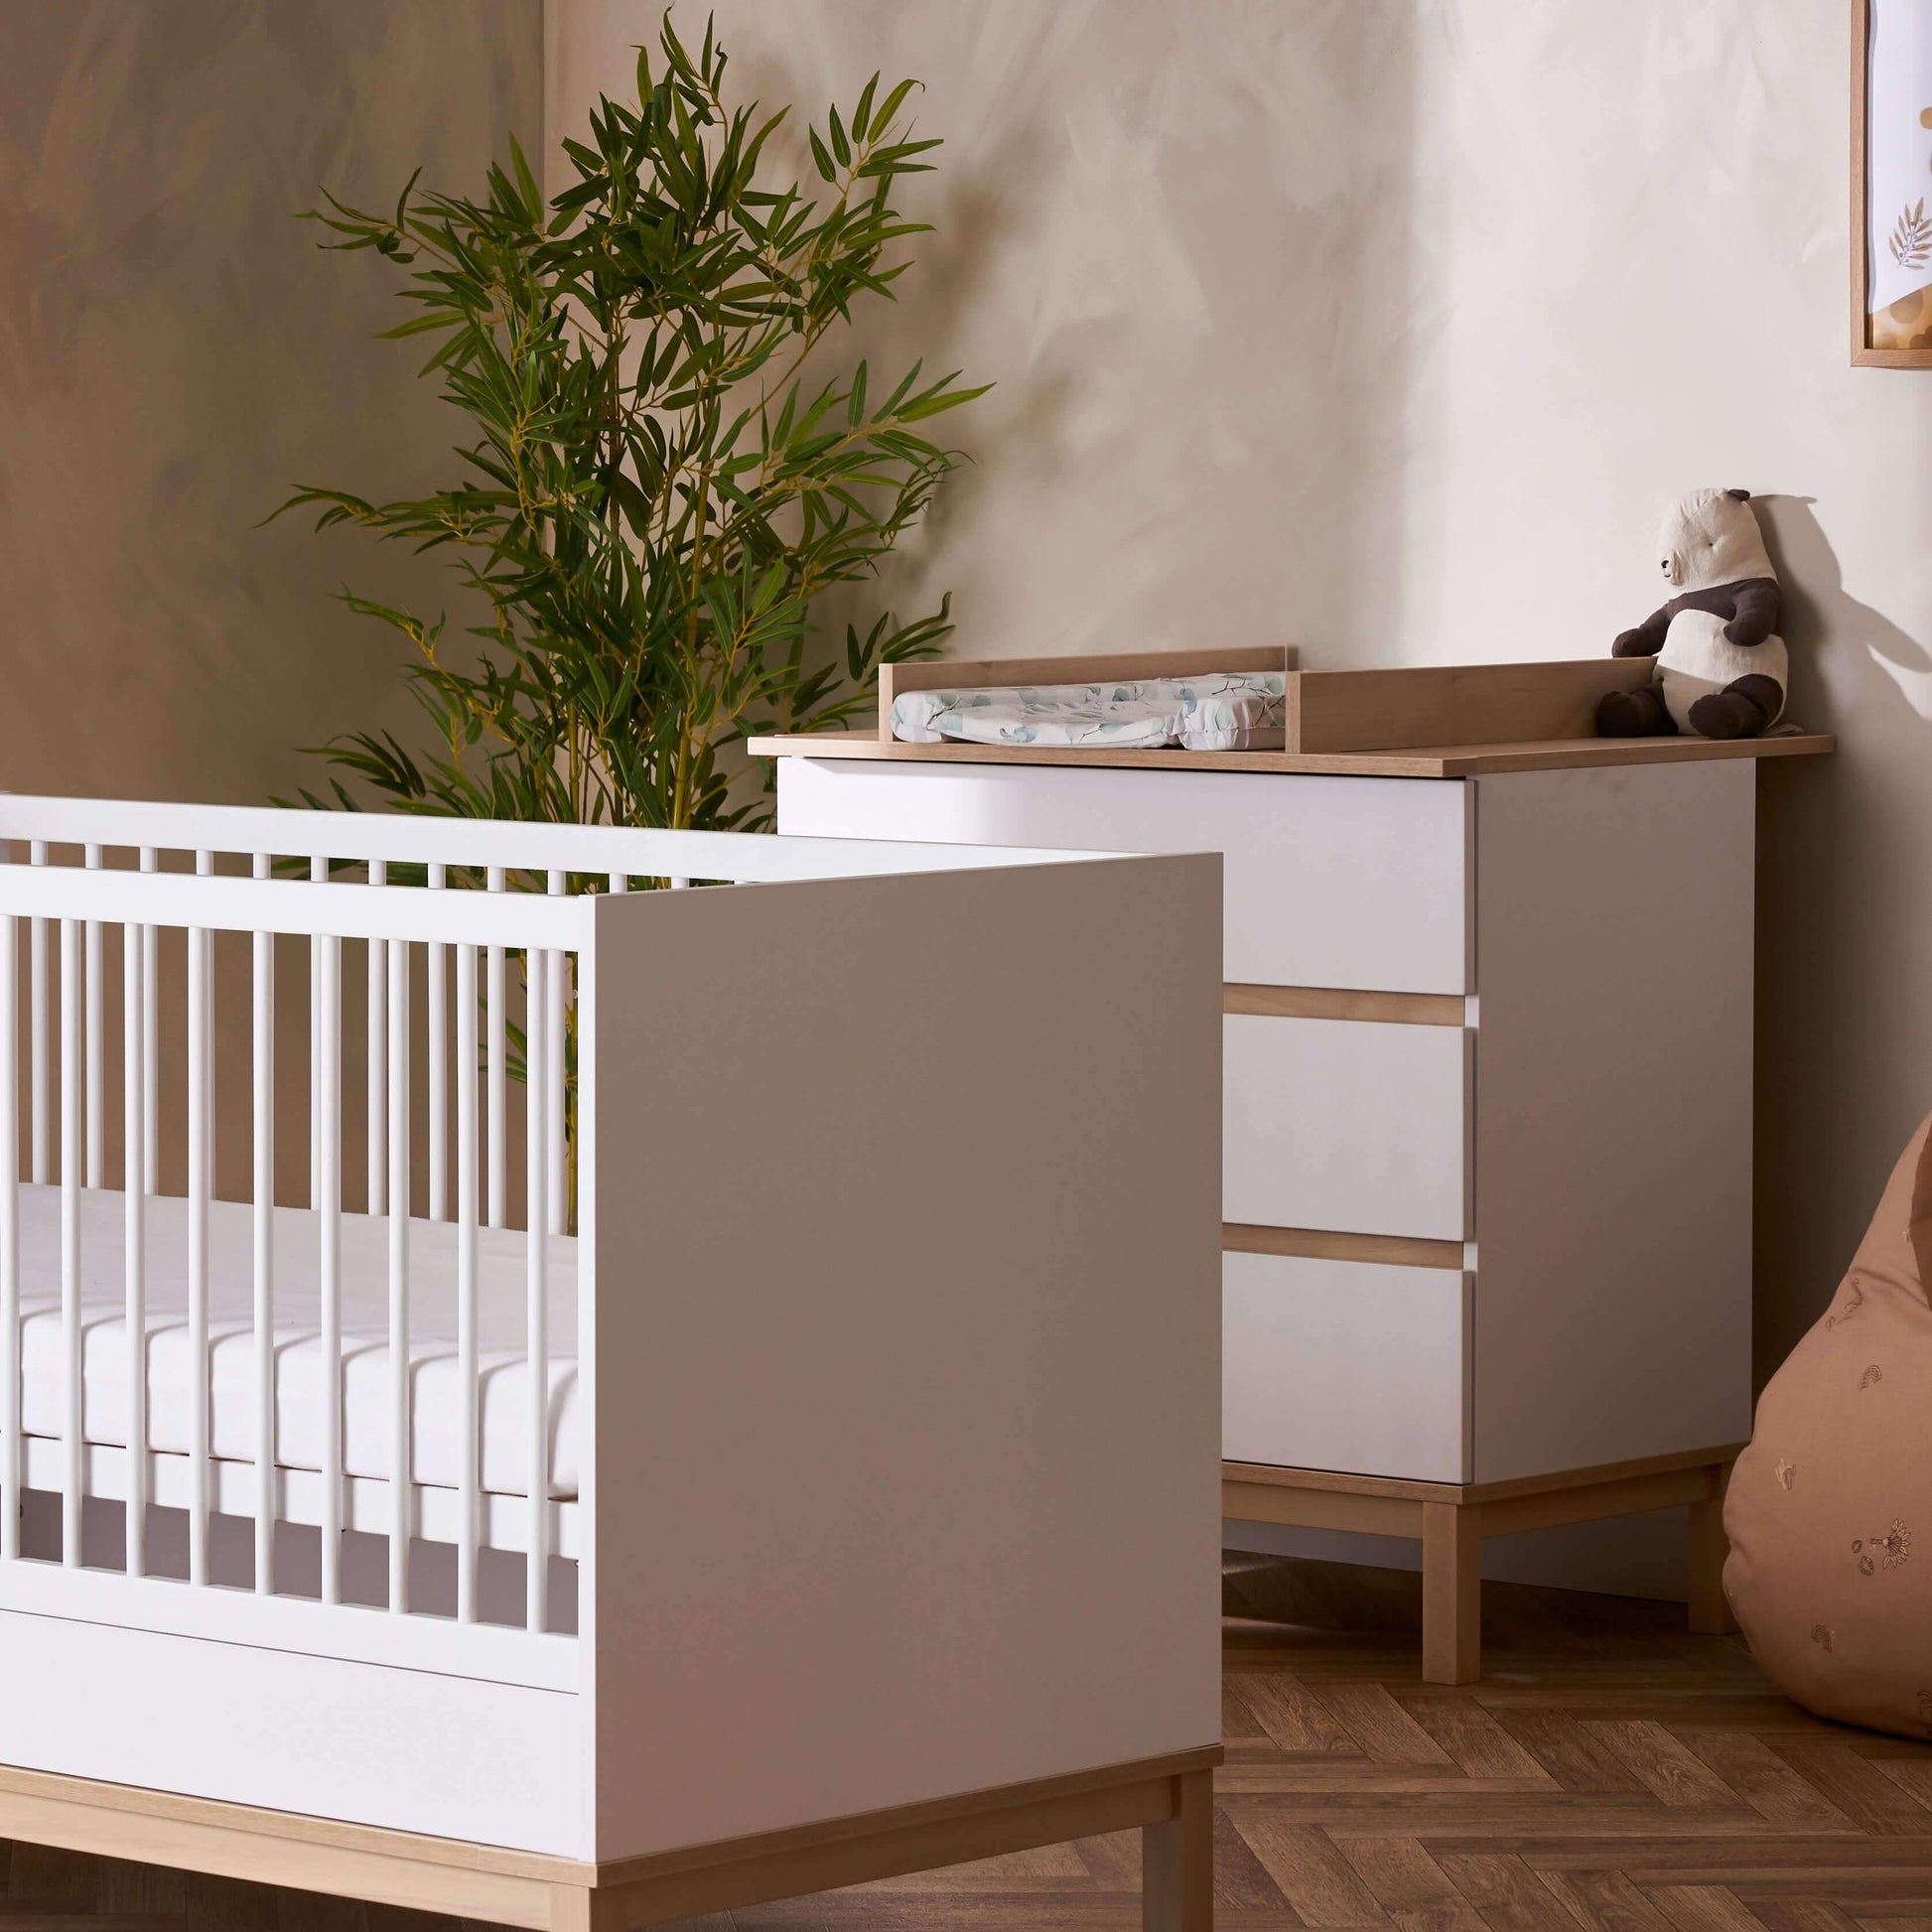 2 piece set in a White finish - Including the Astrid Cot Bed and Changing Unit - 21OB3302D2